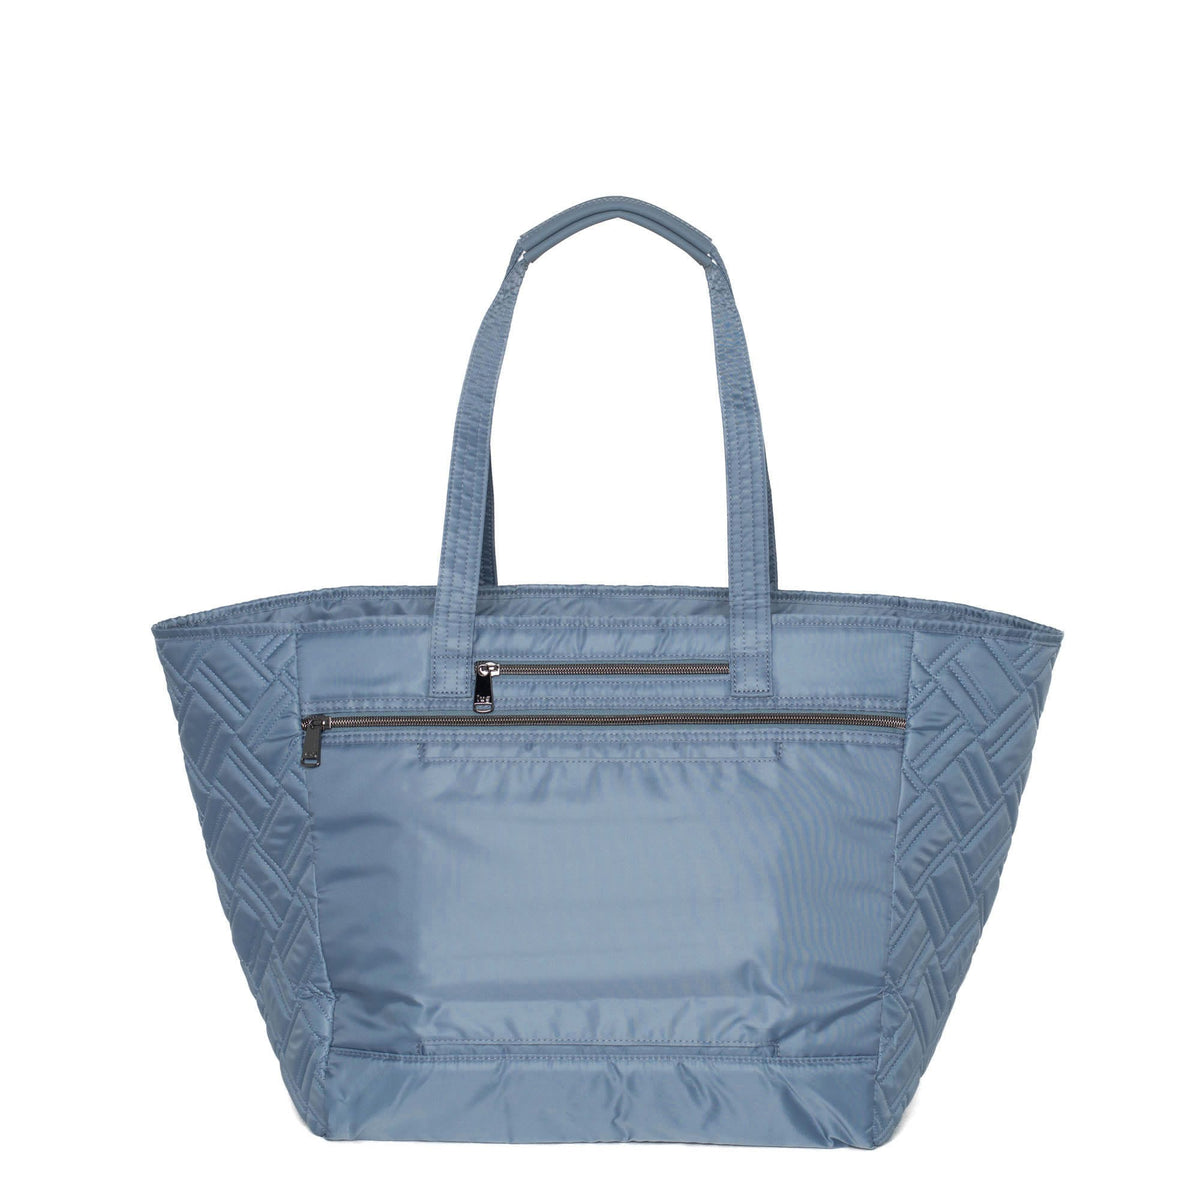 Avion 2 Carry-All Tote Bag